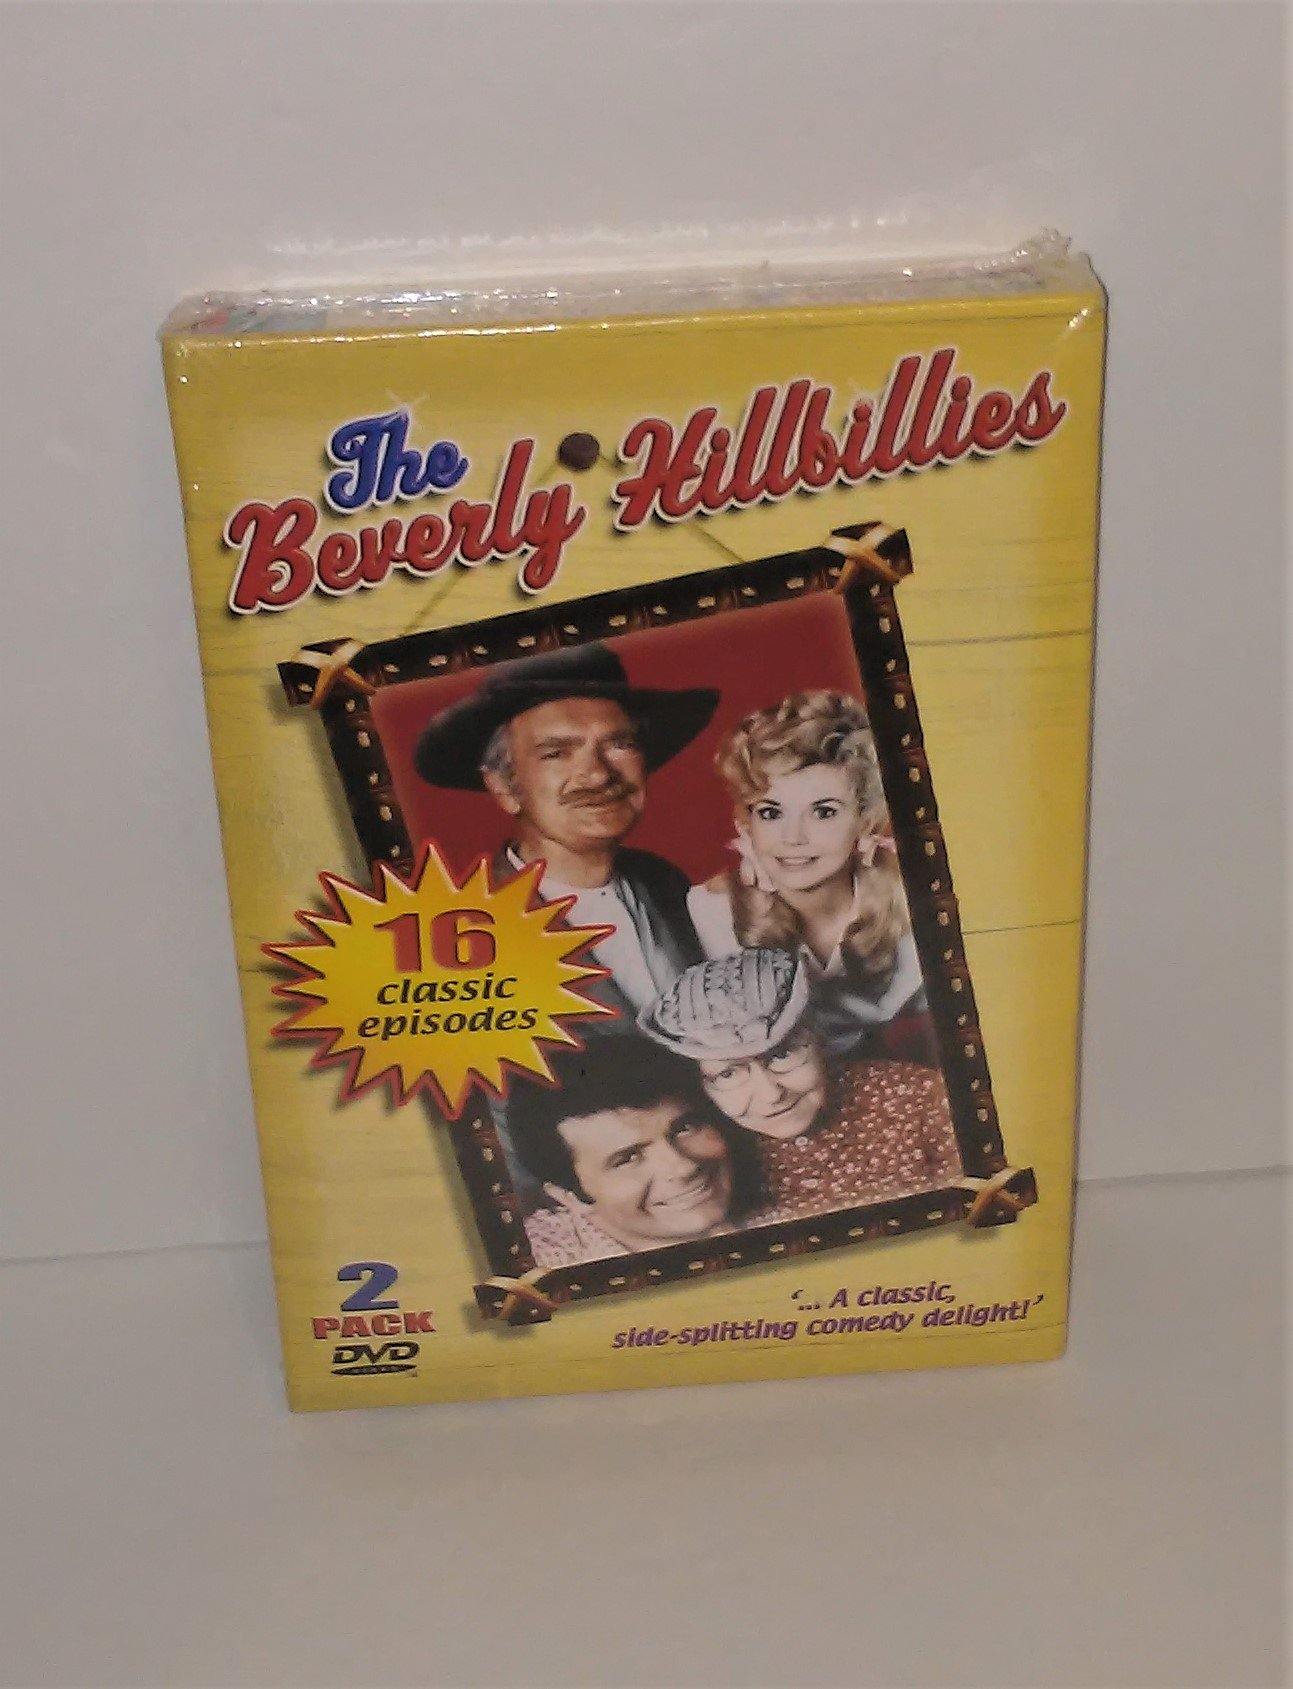 The Beverly Hillbillies 16 Classic Episodes - 2 DVD Set from 2003